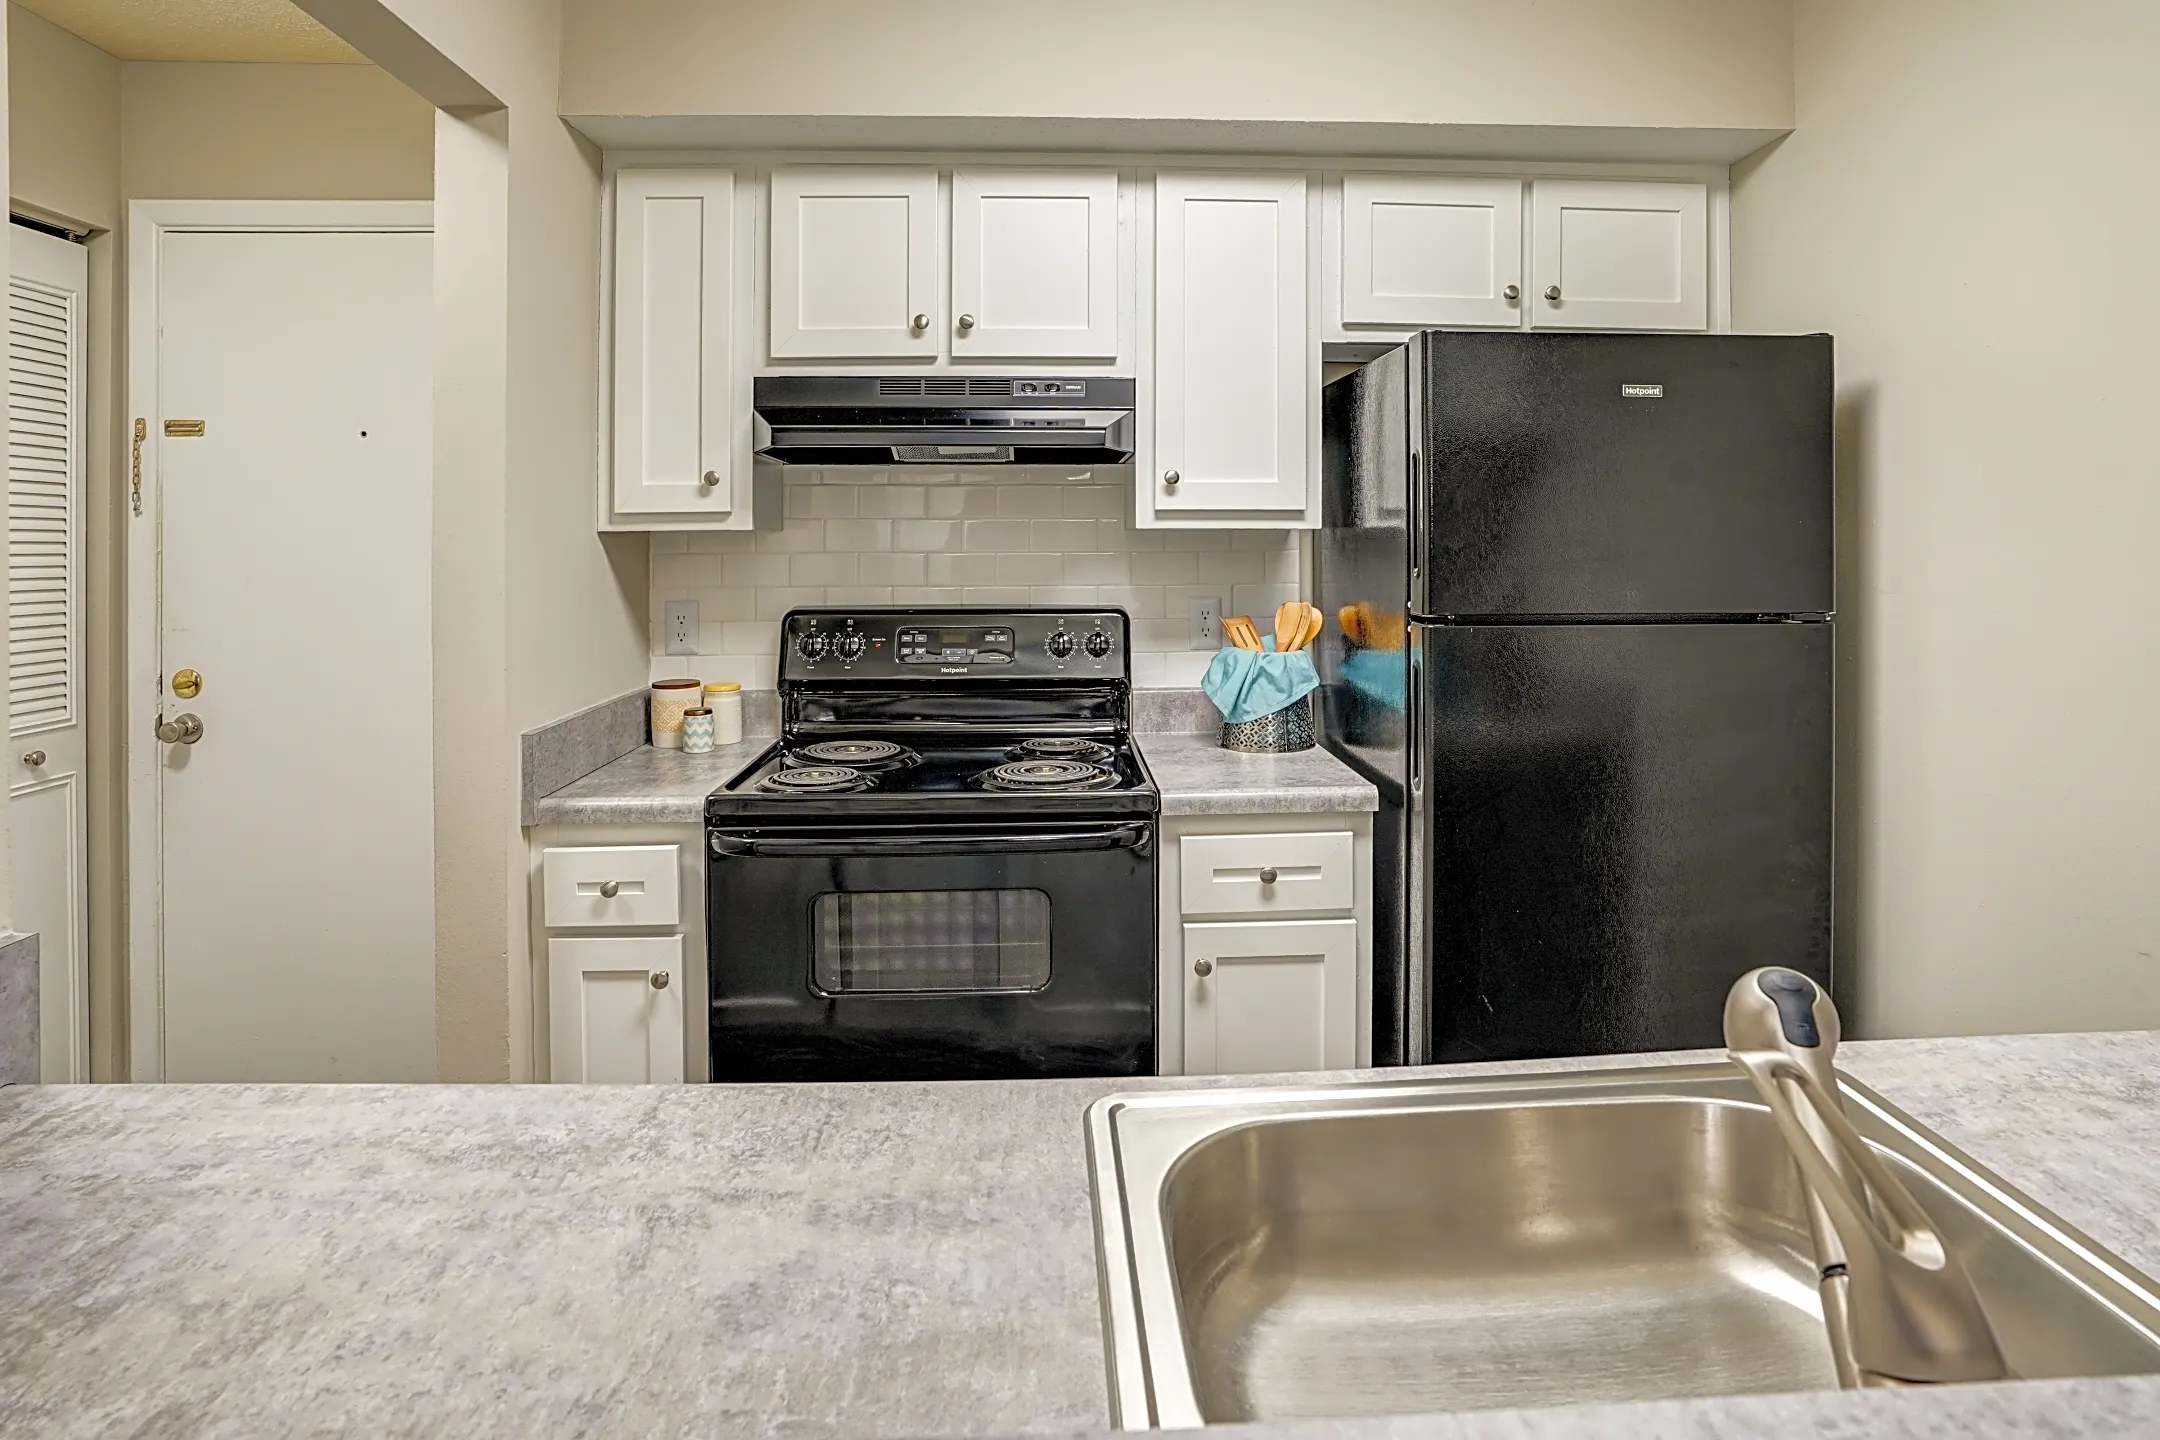 Kitchen - The M Club Apartments - Indianapolis, IN